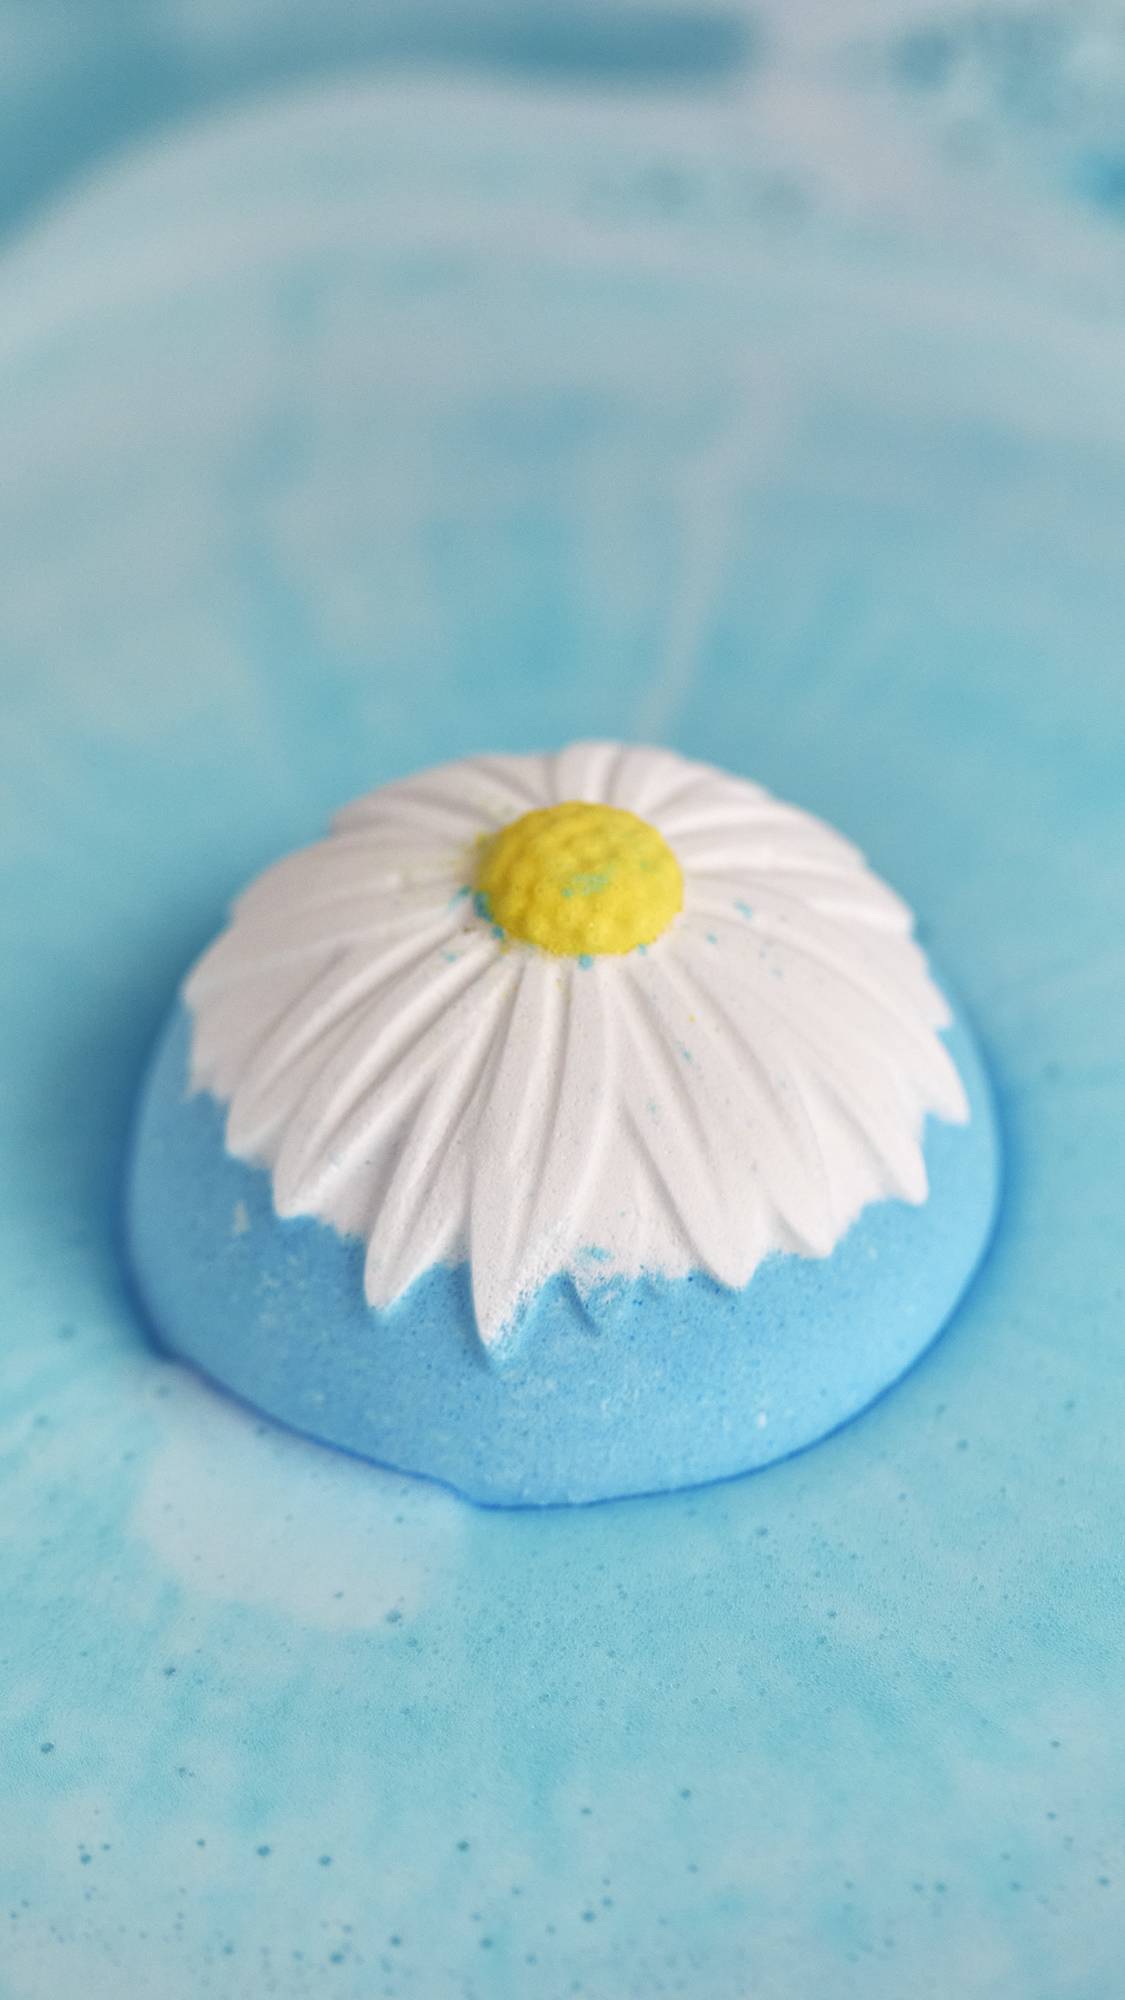 The image shows the view from above as the Blooming Beautiful chamomile bath bomb sits on blue waters. 